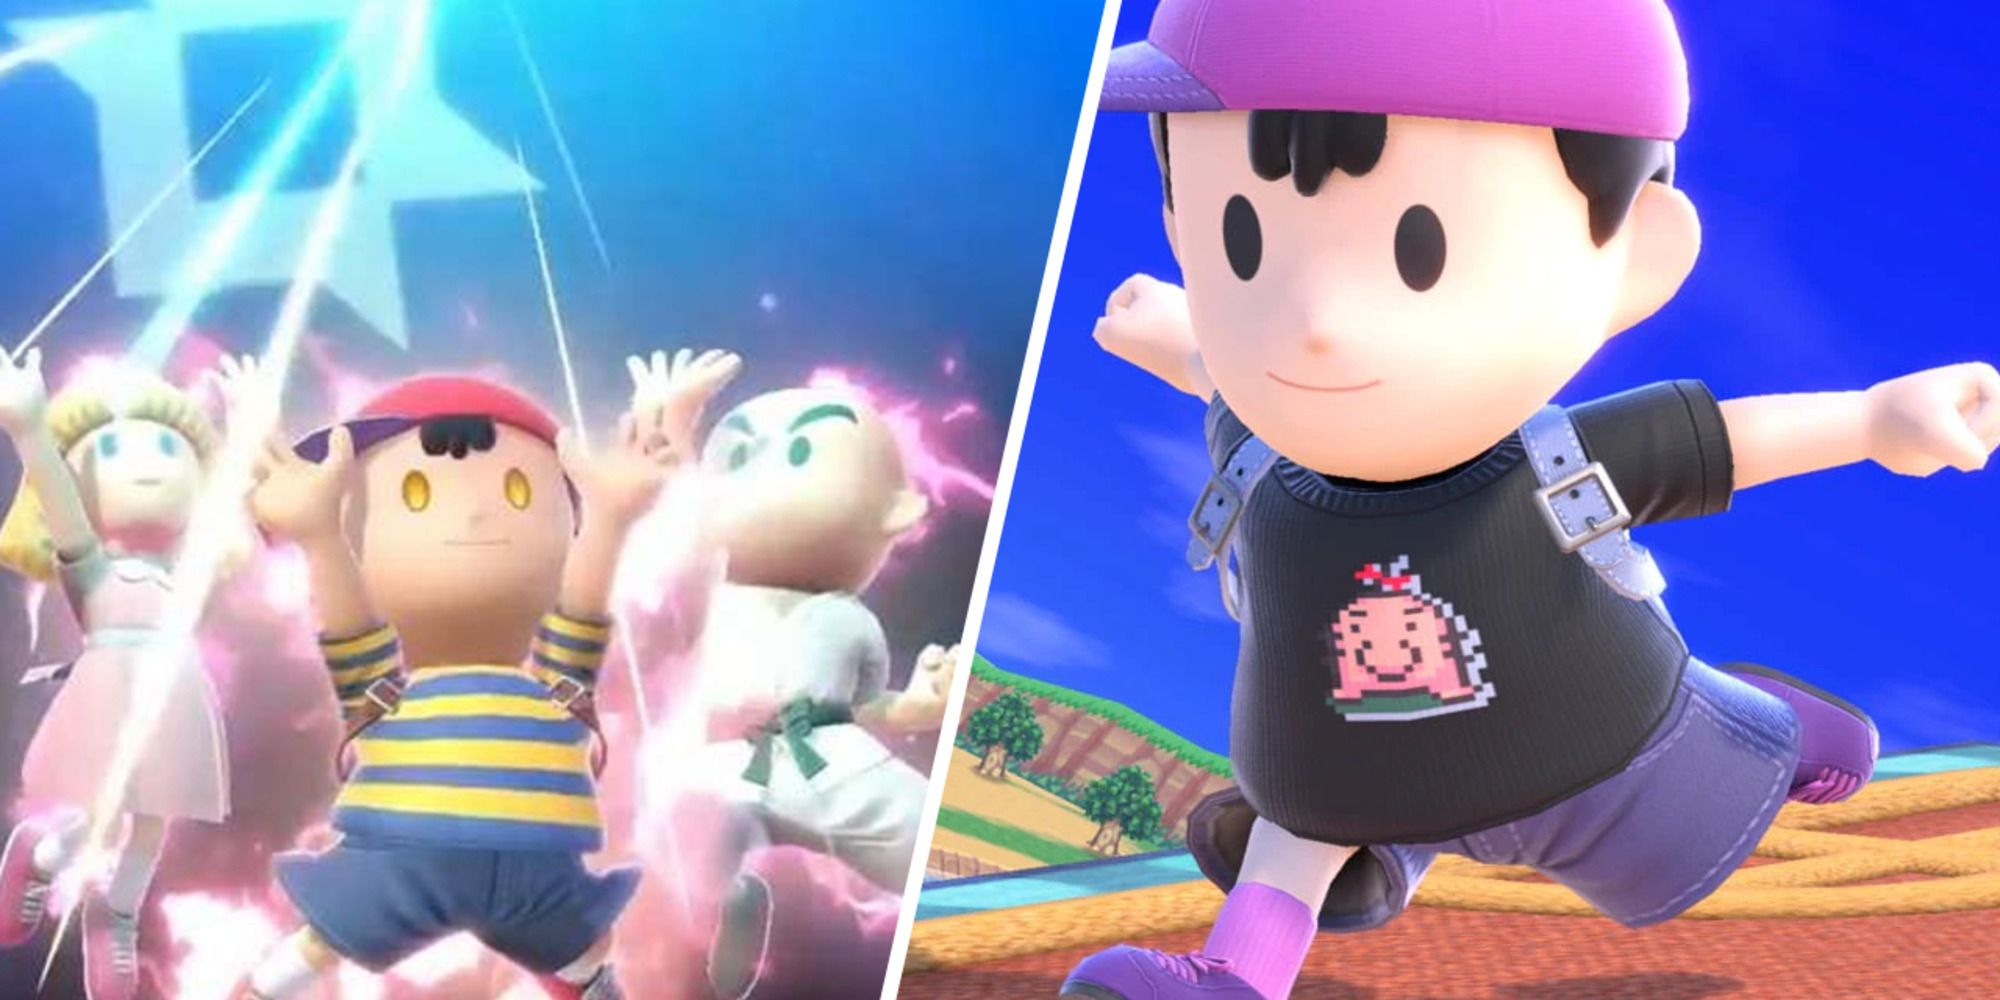 Ness with Paula and Poo in his Final Smash, and him running in Super Smash Bros Ultimate.